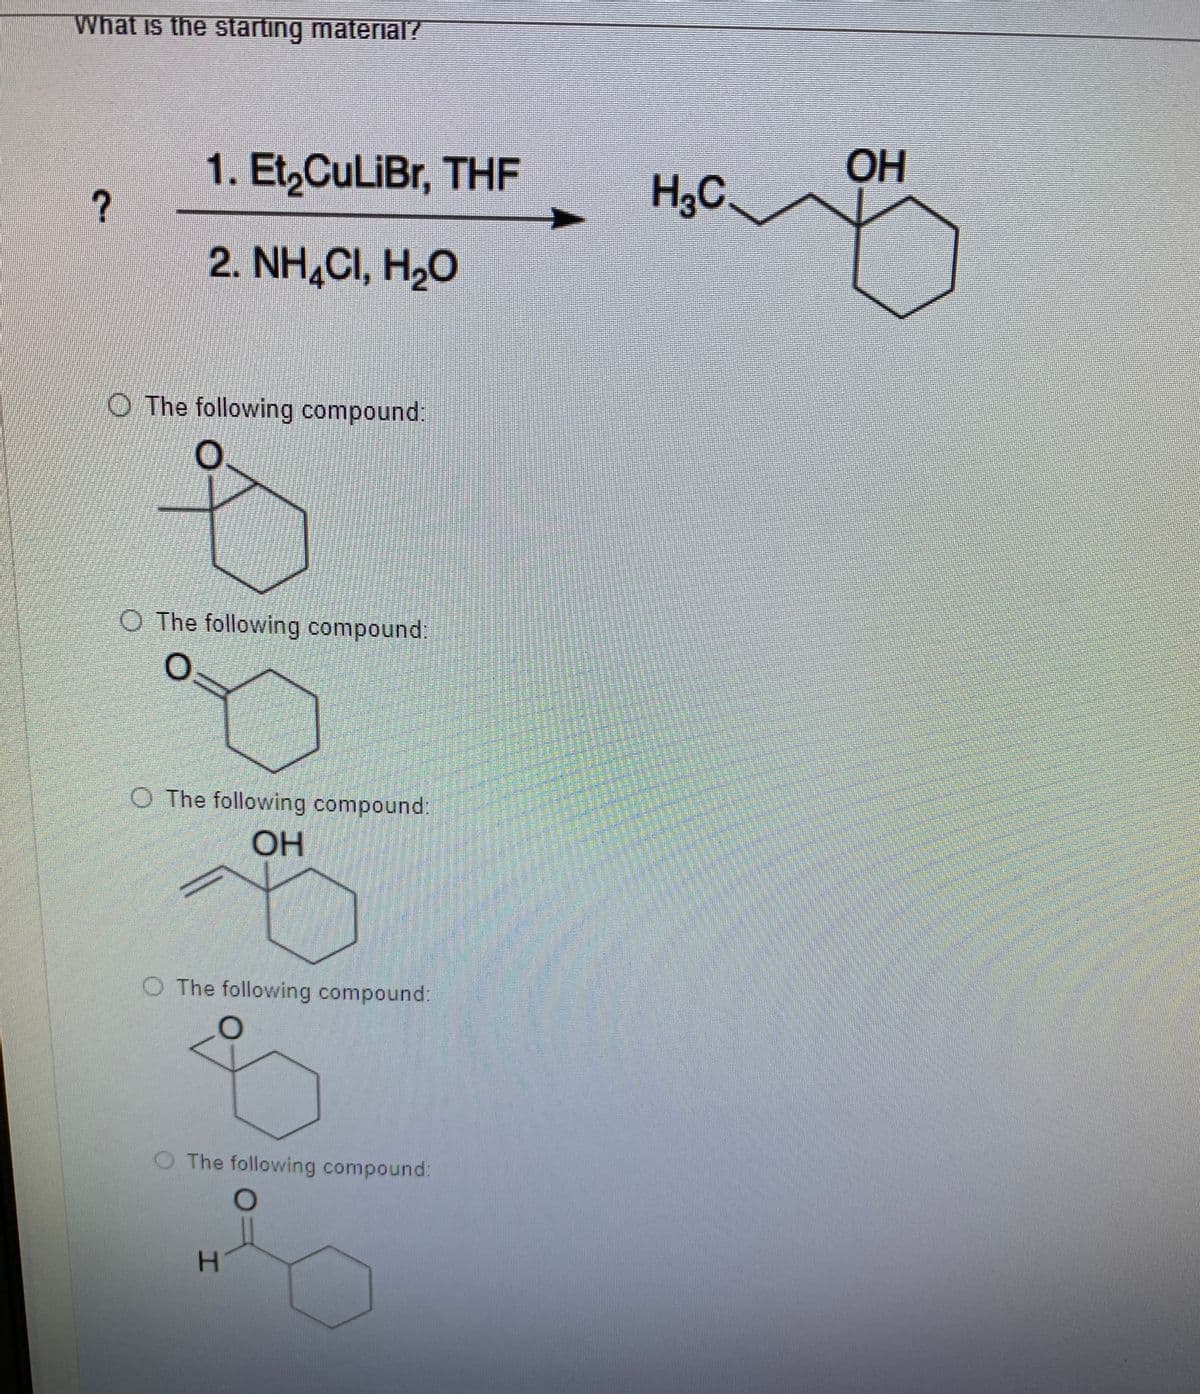 What is the starting material?
OH
1. Et,CuLiBr, THF
H,C
2. NH,CI, H20
O The following compound:
O The following compound:
O The following compound:
OH
O The following compound:
O The following compound:
的
